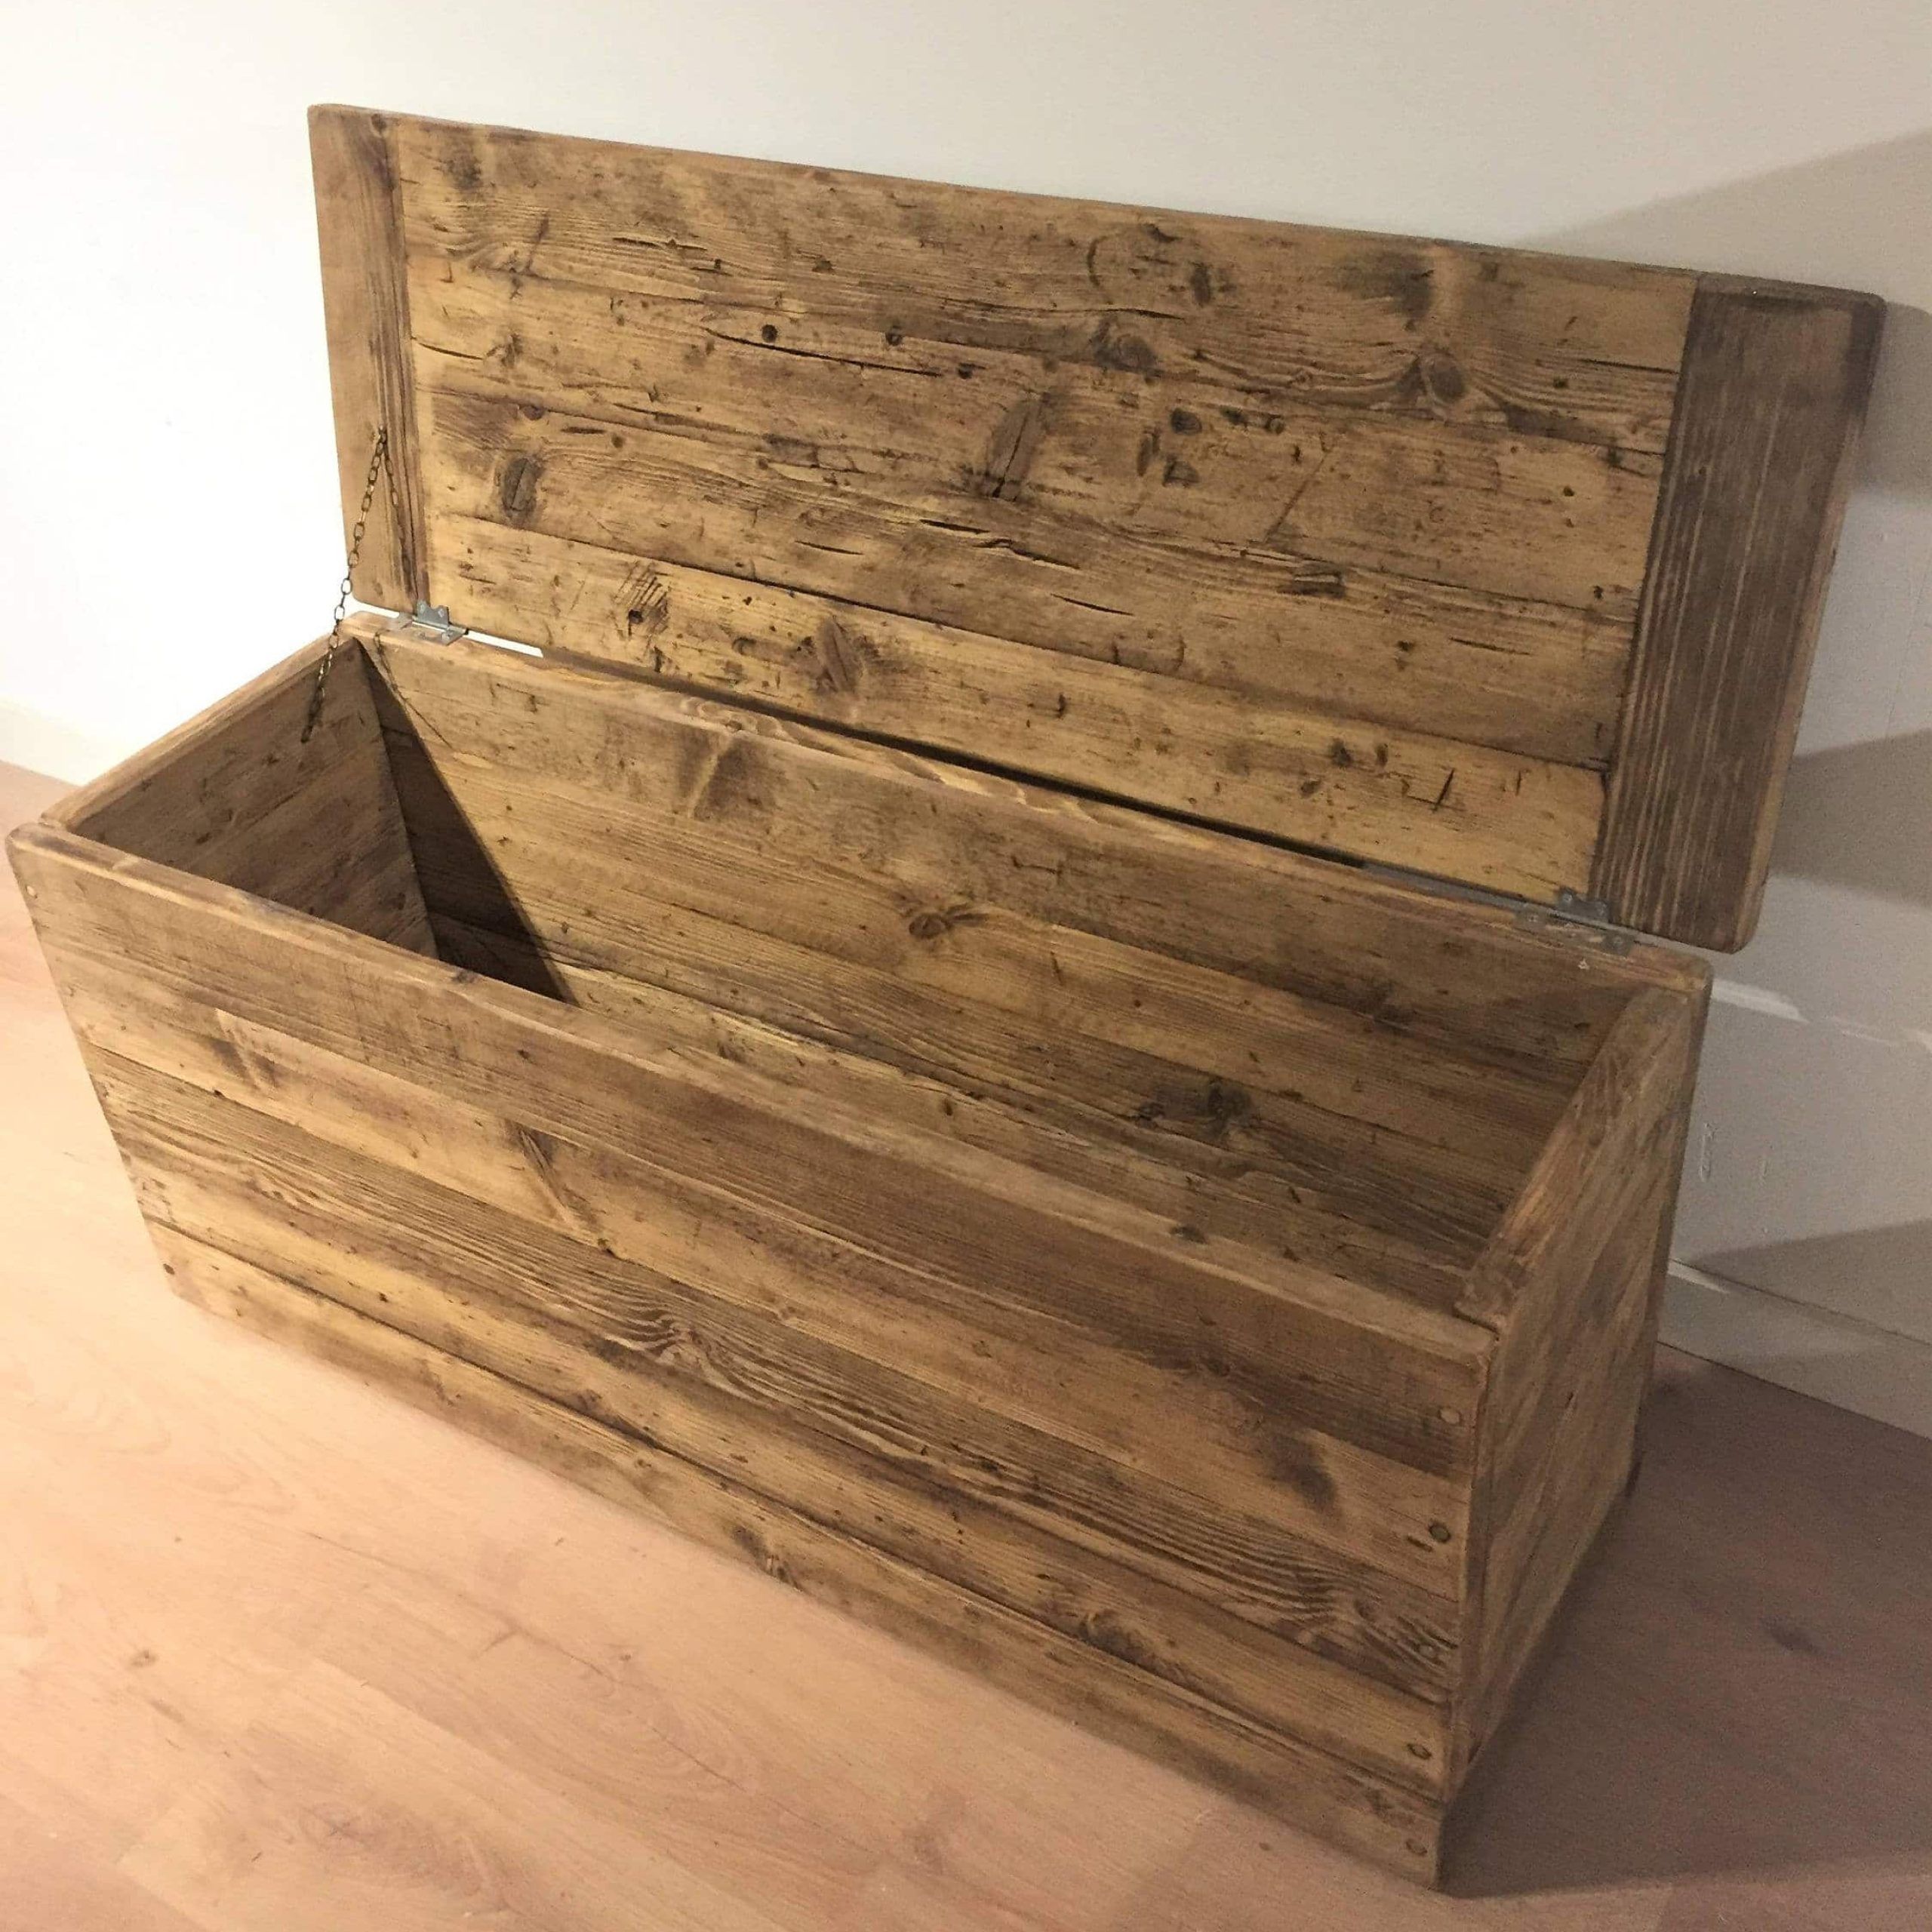 Reclaimed Wooden Ottoman Or Blanket Storage Box – Newco Interiors – Bespoke  Joinery, Made To Measure Pertaining To Wood Storage Ottomans (View 3 of 15)